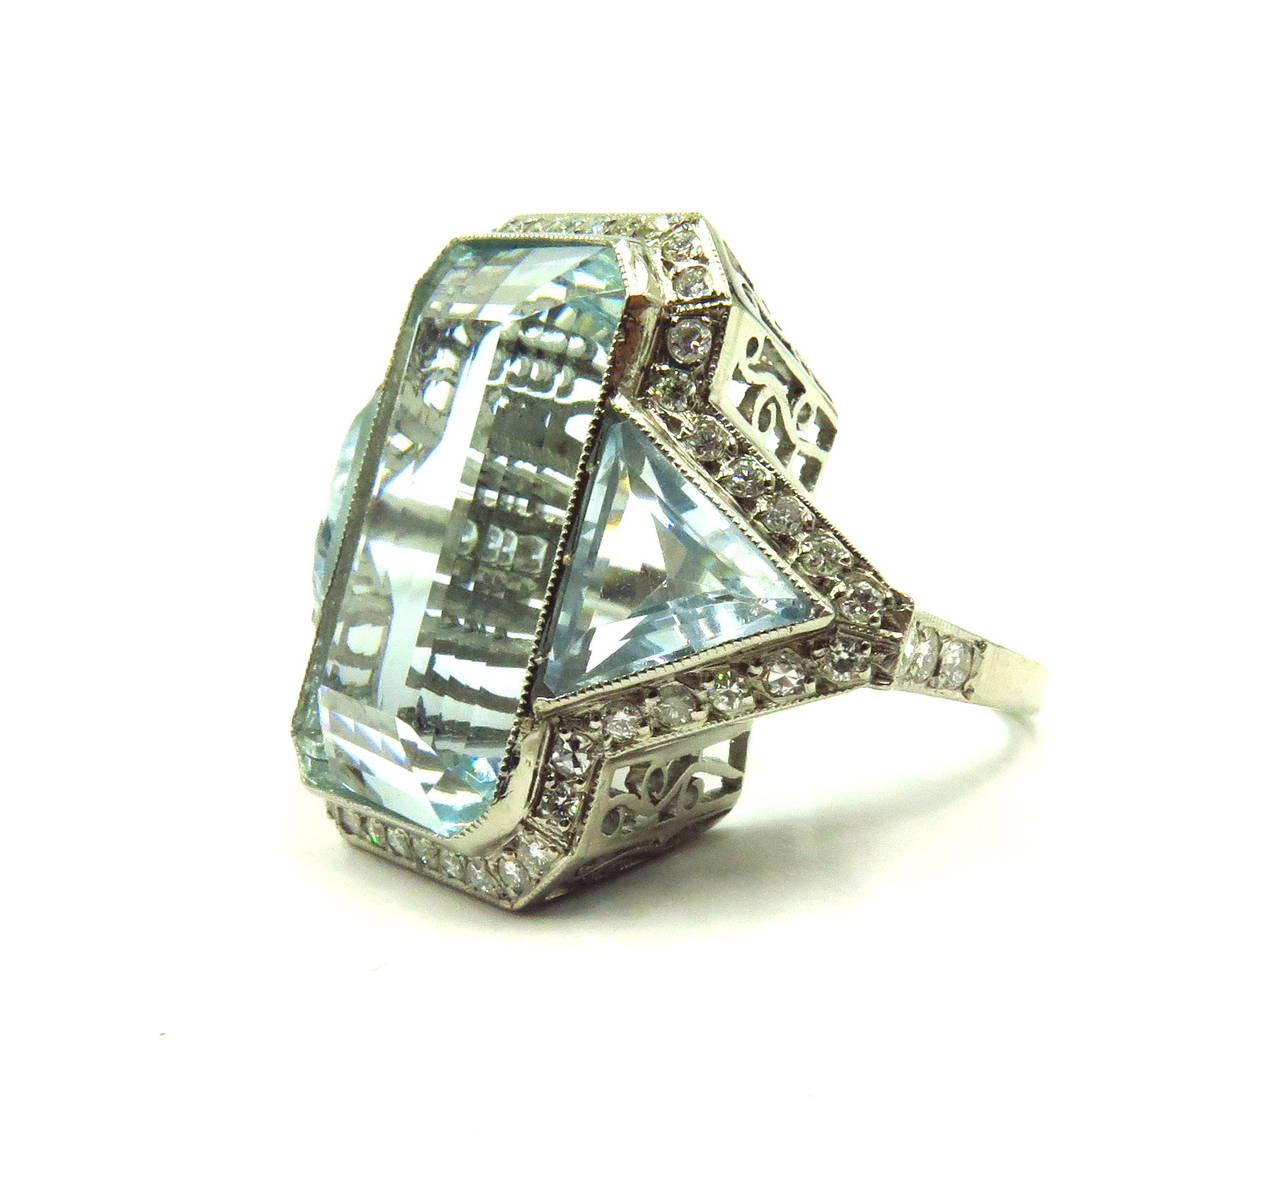 This incredible platinum 3 stone aquamarine ring is very impressive on the finger. The center aquamarine is approximately 30 ct. The diamonds go all around the perimeter of this ring and total total diamond weight is approx 1 ct. The detail on the